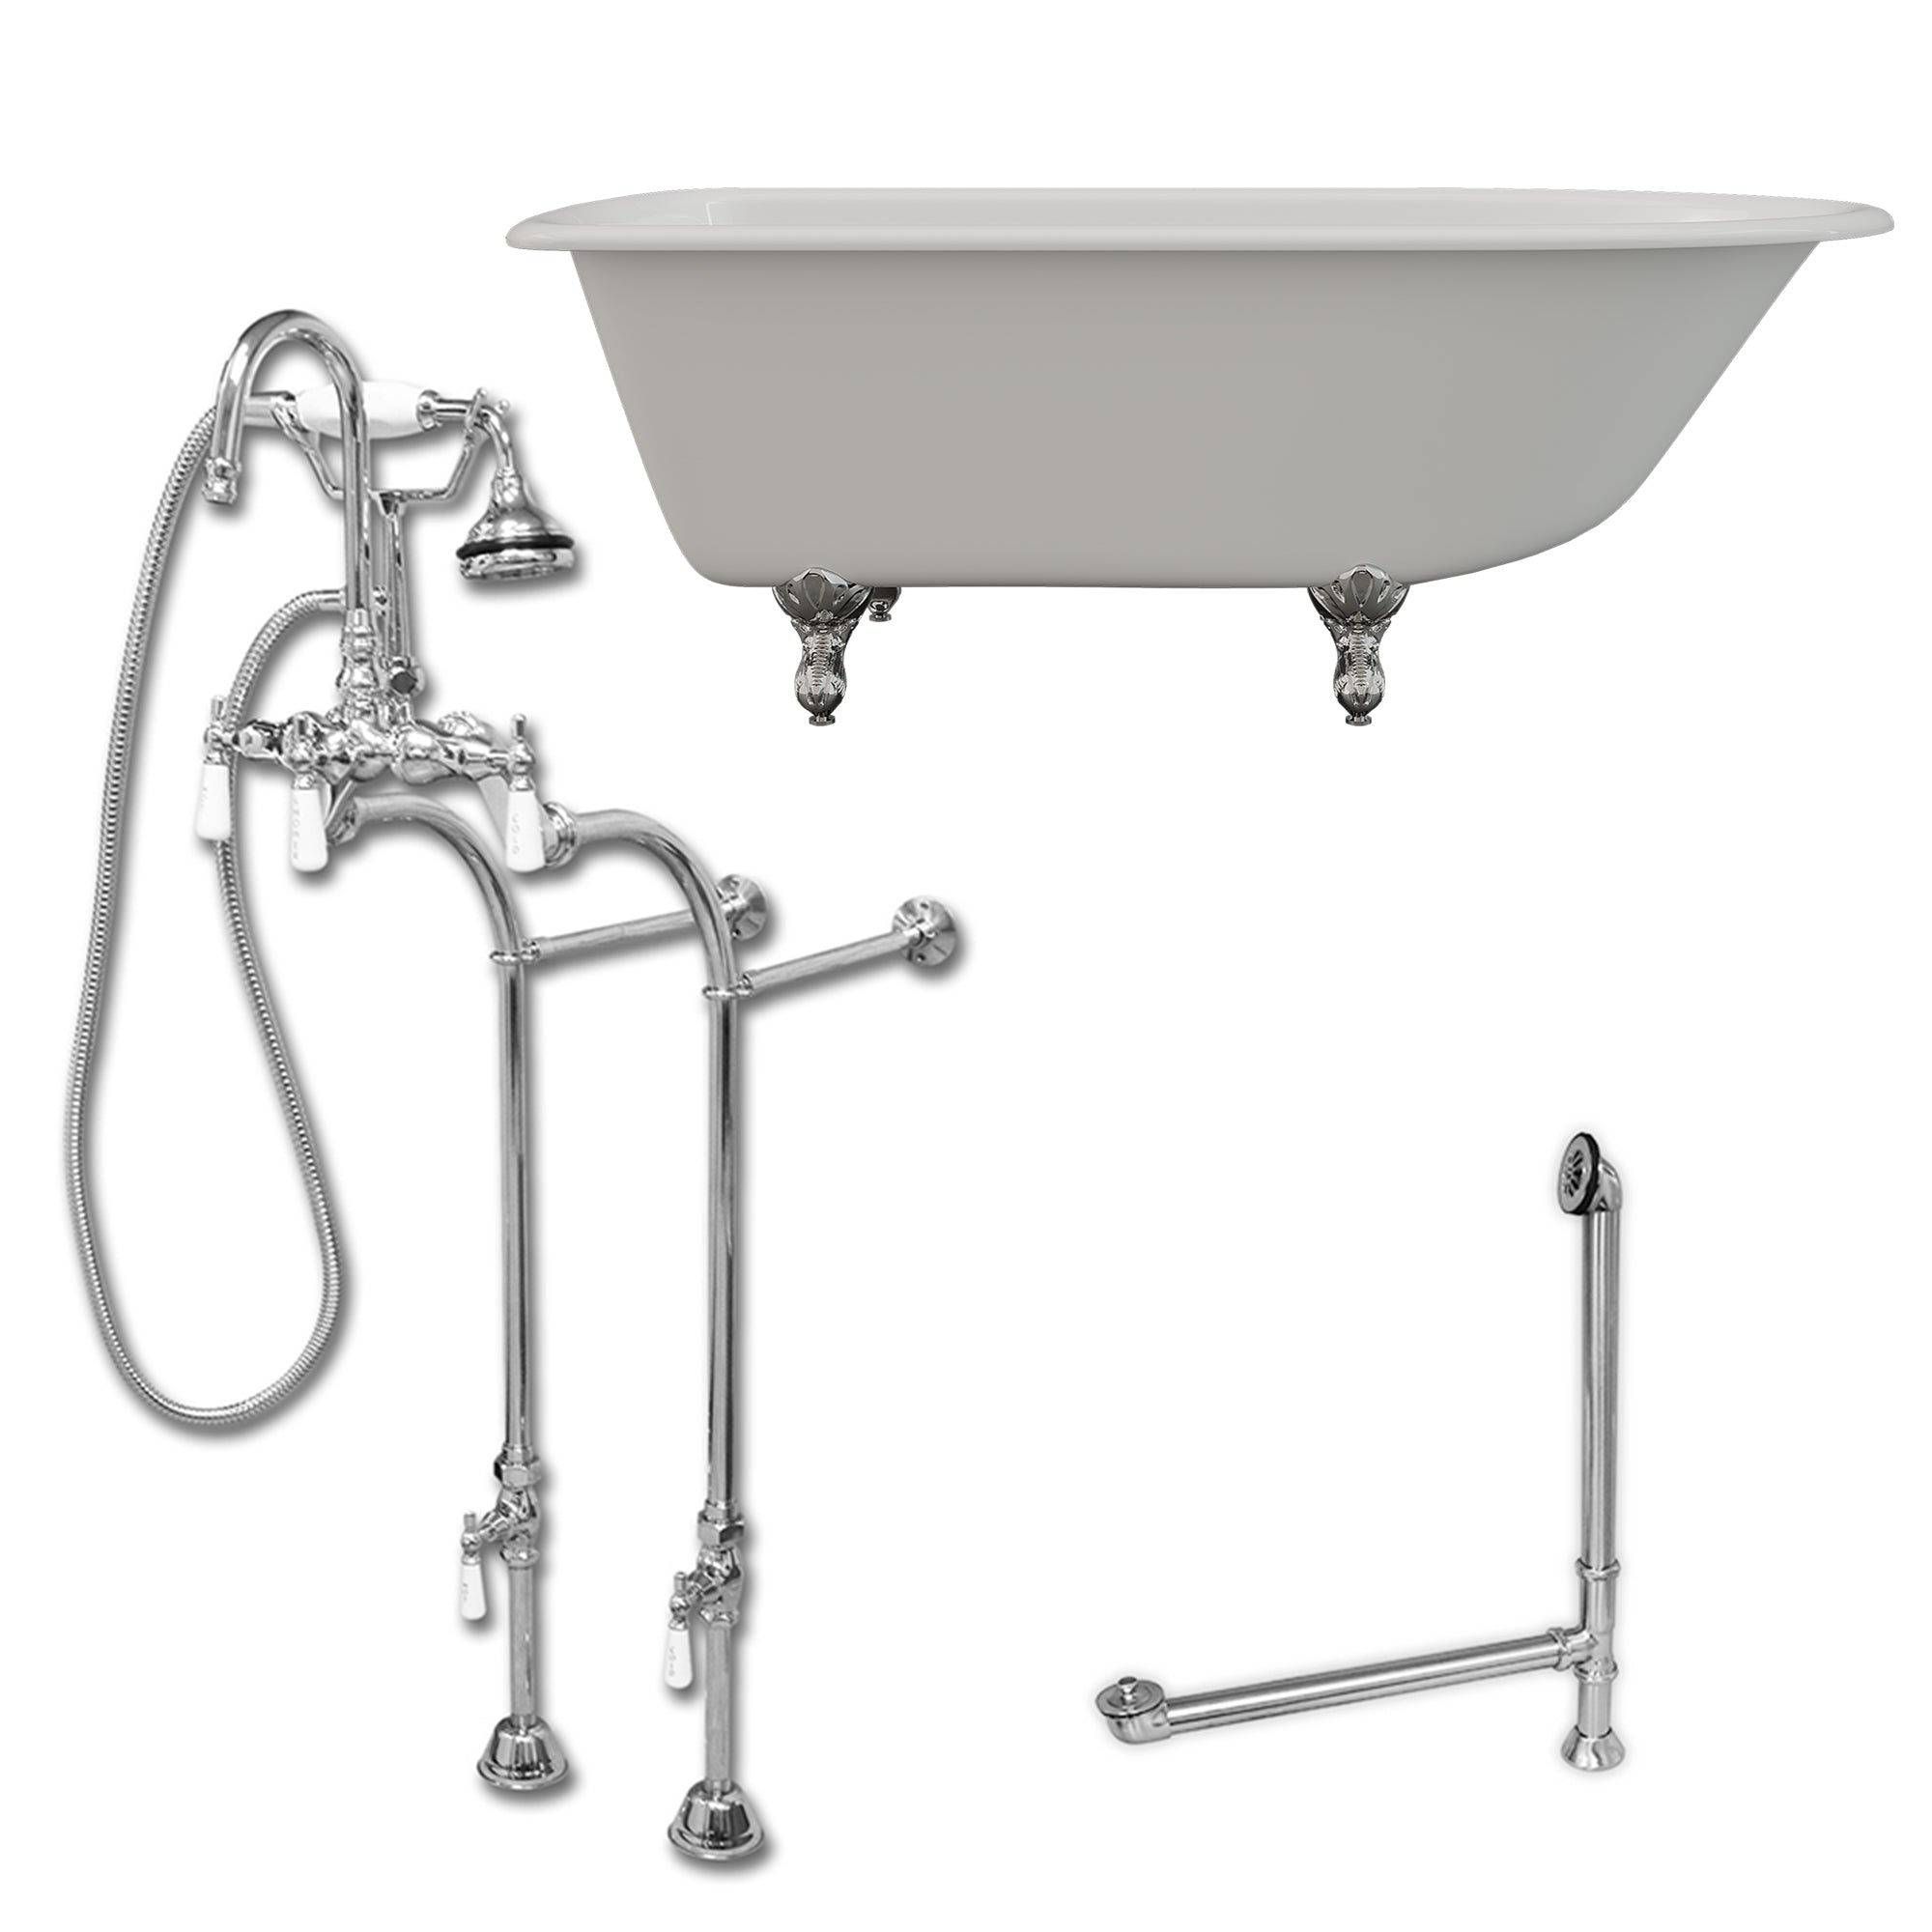 Cambridge Plumbing 60-Inch Rolled Rim Cast Iron Clawfoot Tub (Porcelain enamel interior and white paint exterior) and Freestanding Plumbing Package (Brushed Nickel) RR61-398684-PKG-NH - Vital Hydrotherapy